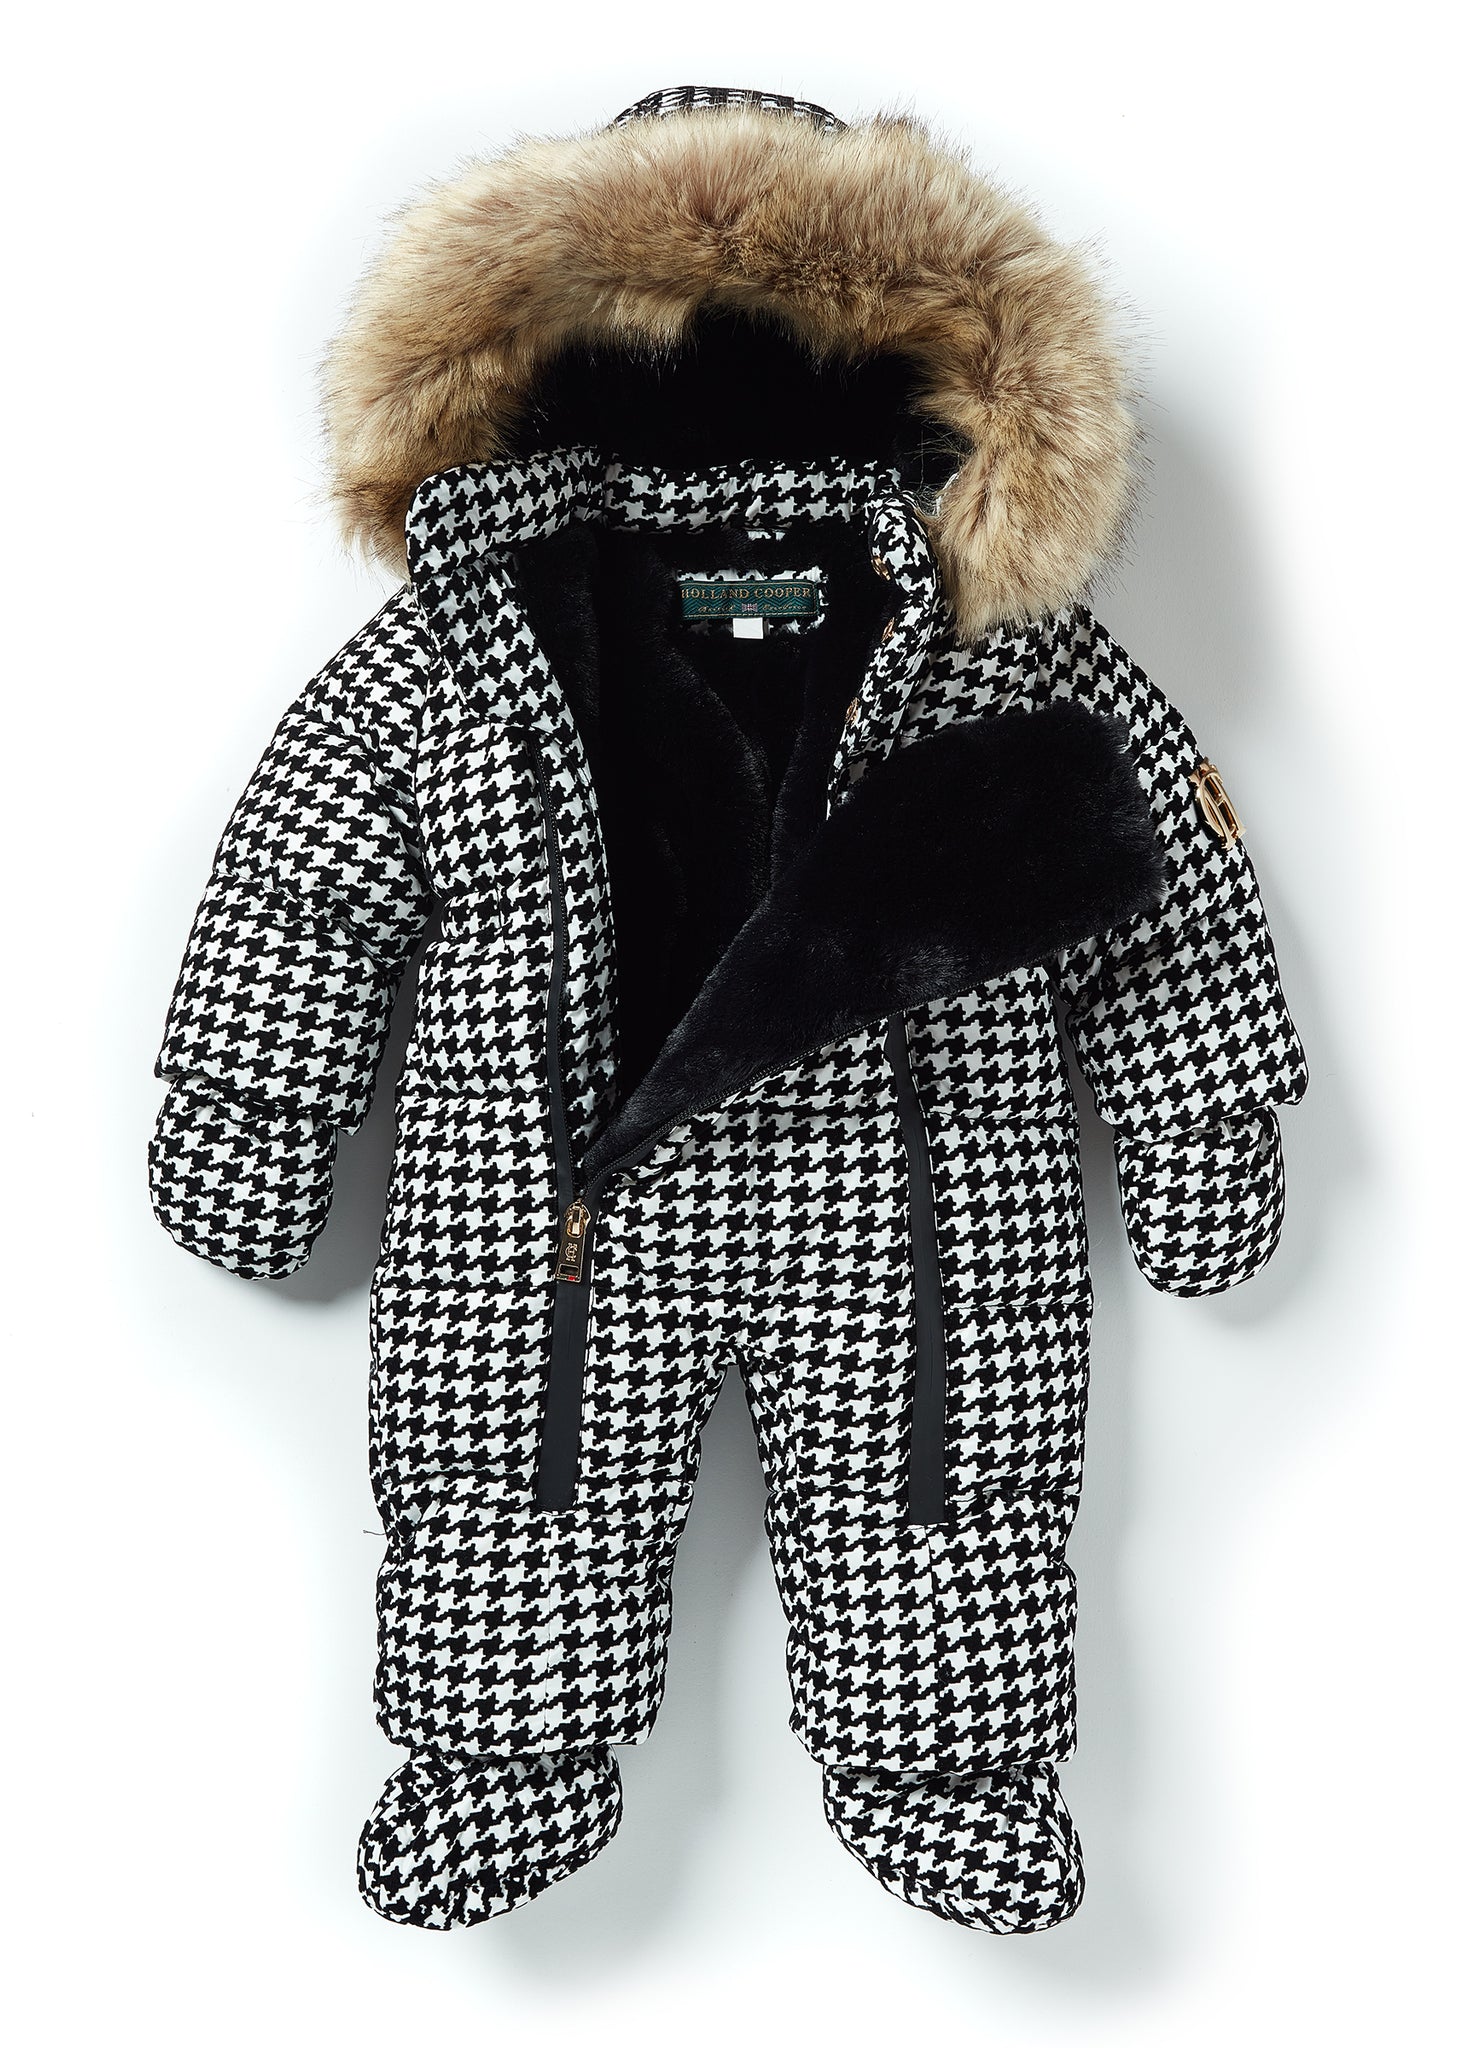 Mini Me - Houndstooth Snowsuit (Houndstooth)